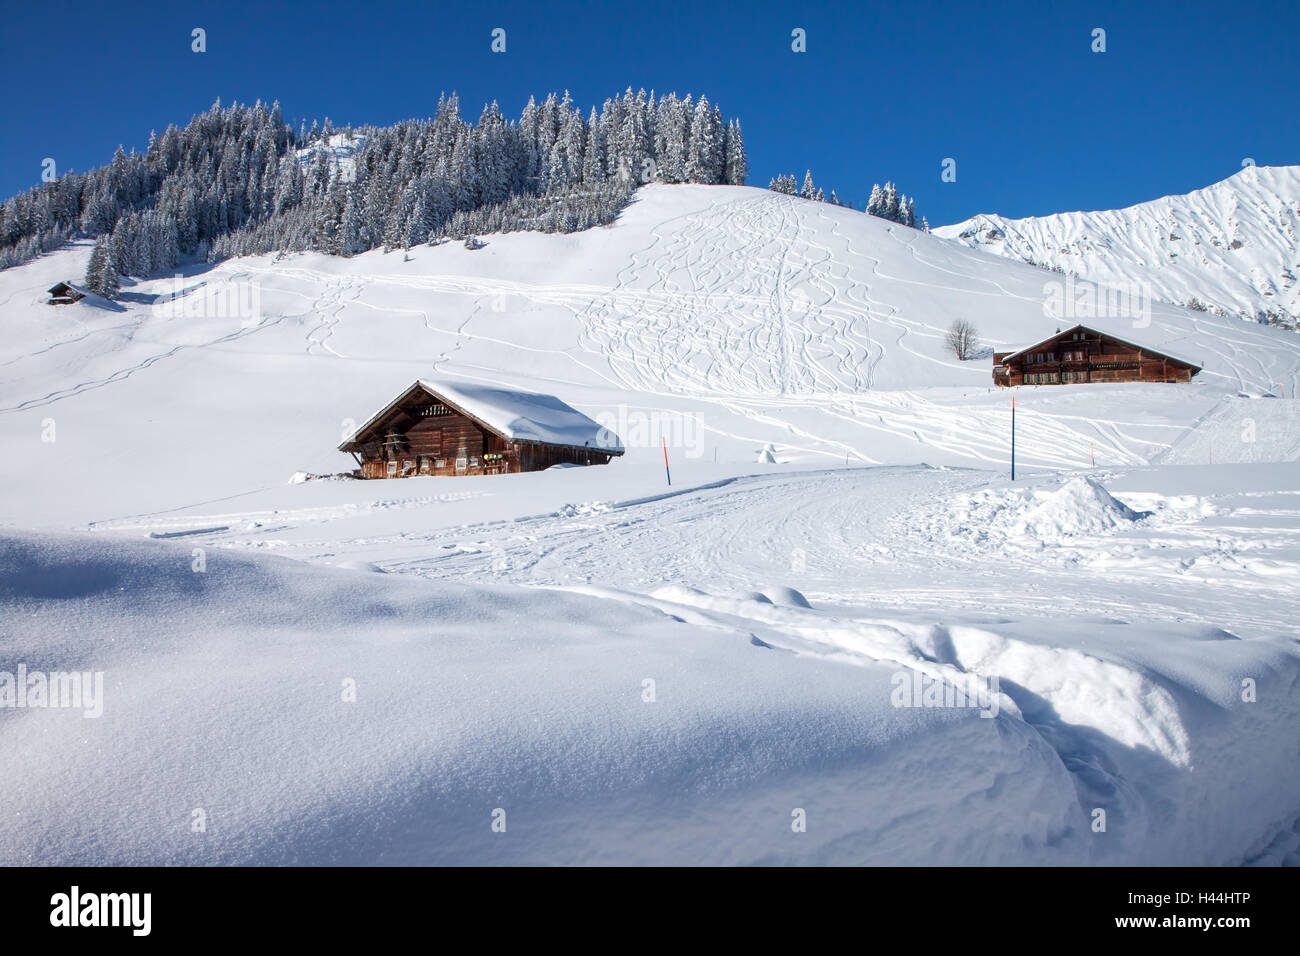 Farmhouse in the Swiss Alps covered by snow, Adelboden, Switzerland Stock Photo